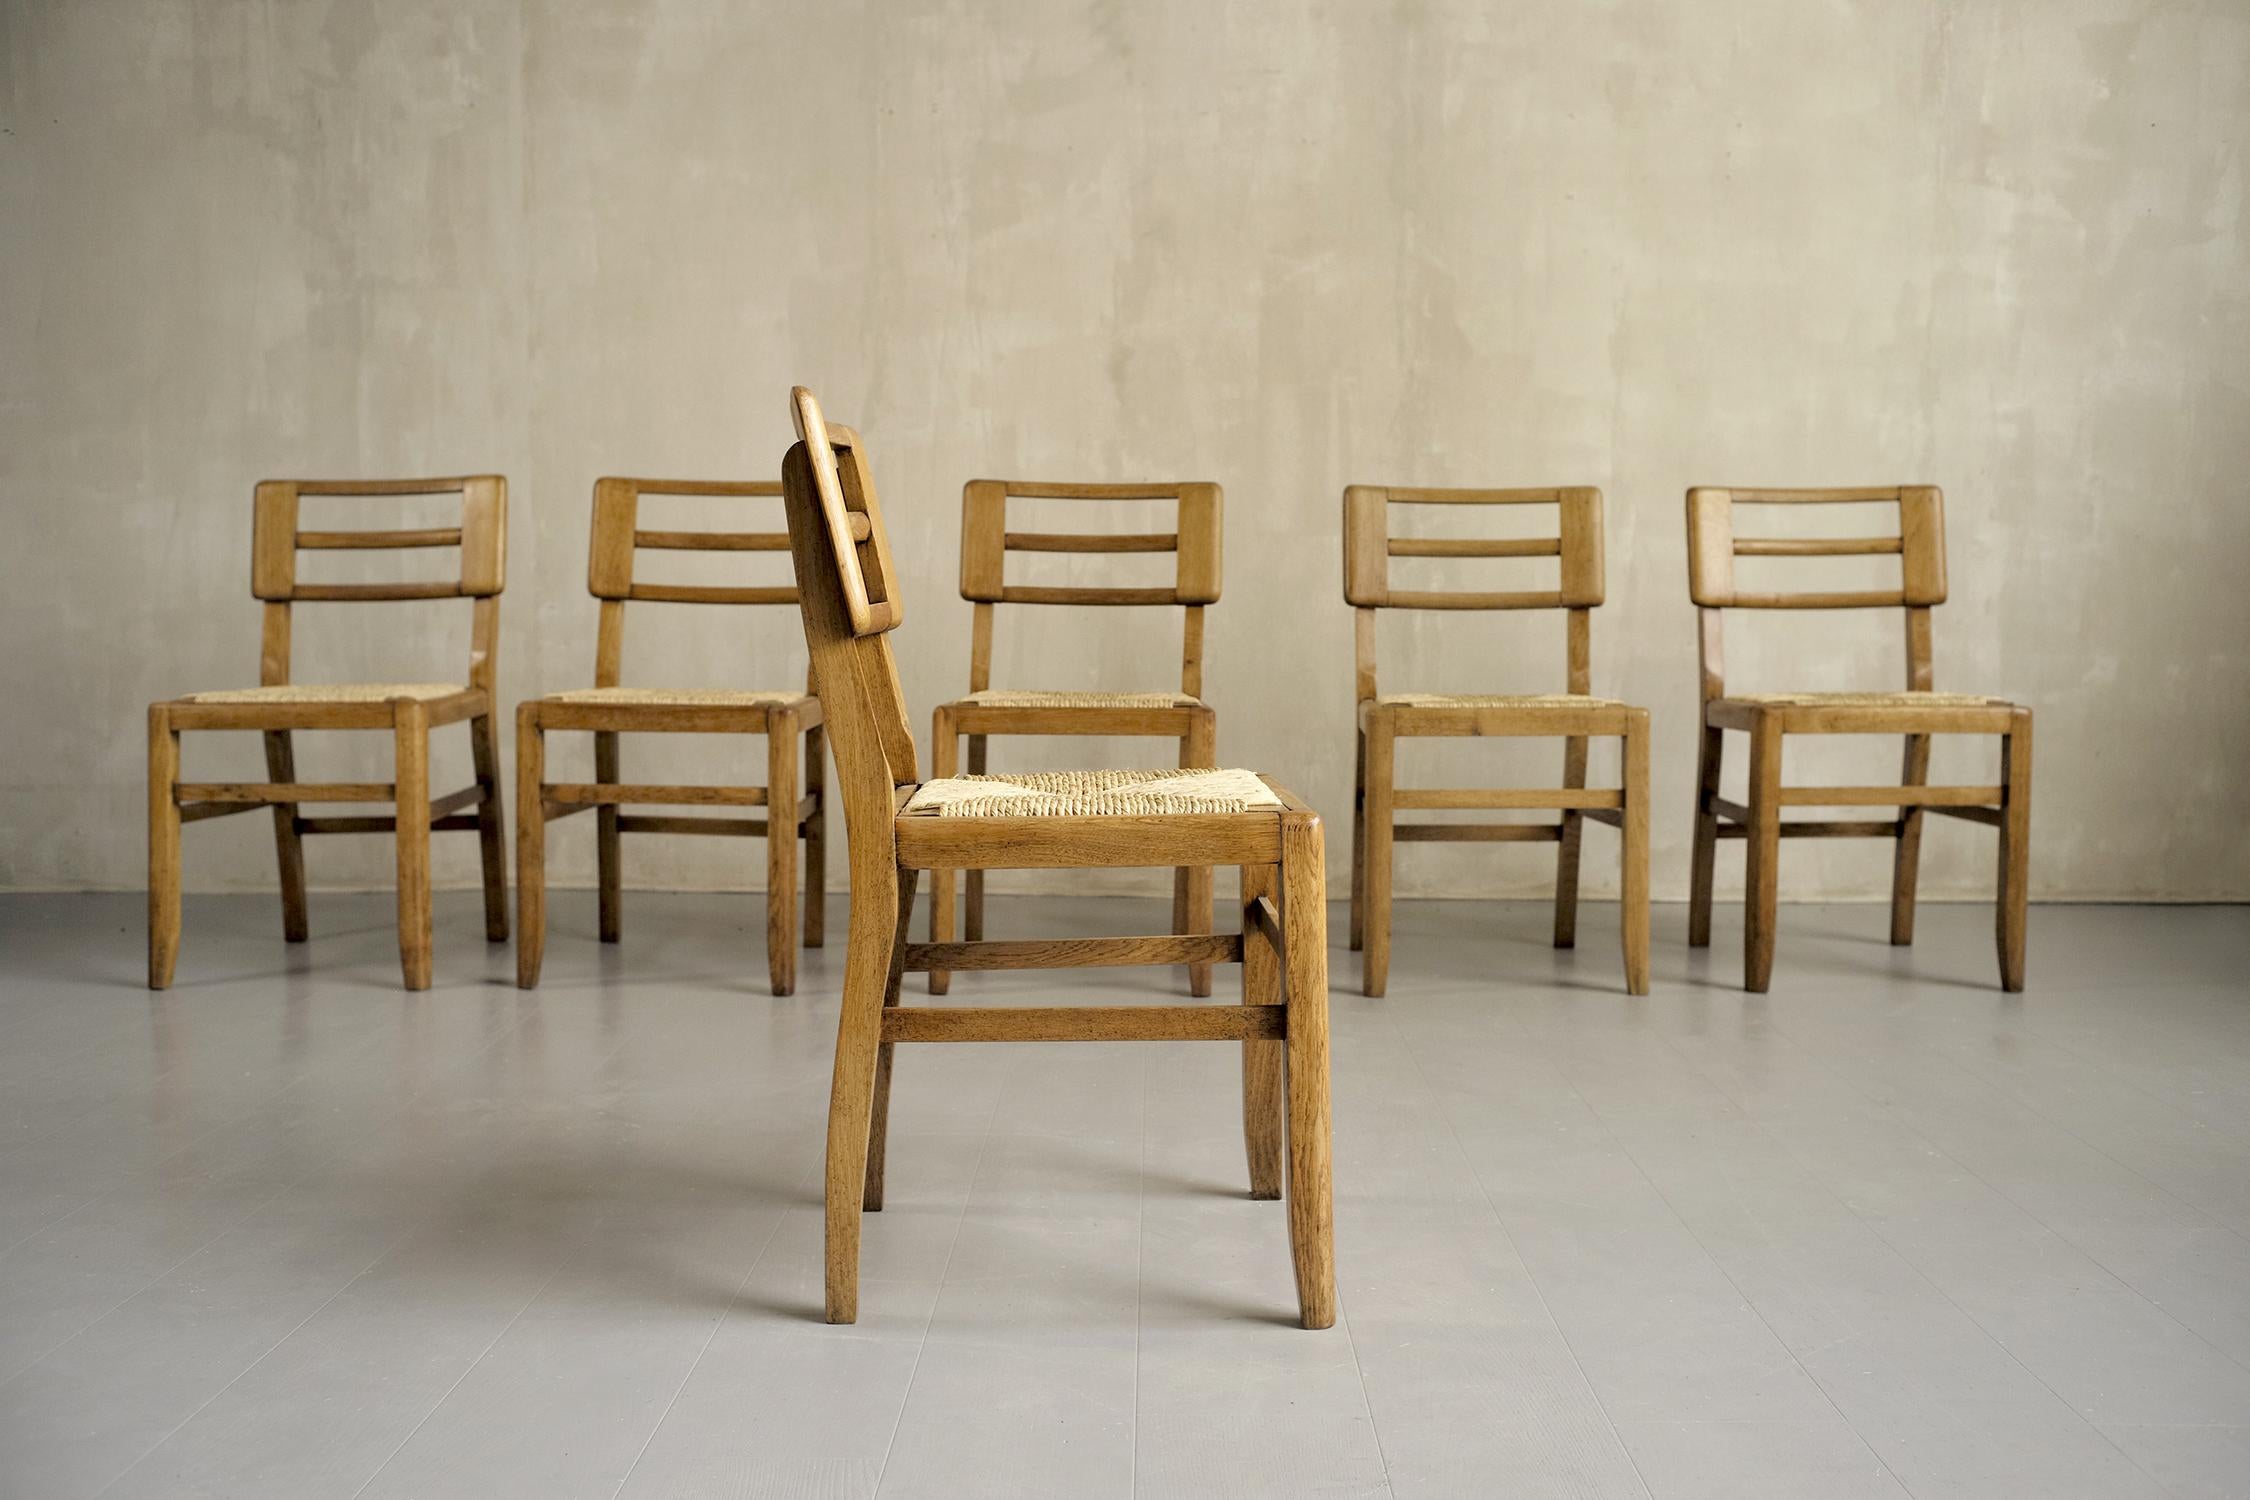 20th Century Pierre Cruège, Set of 6 Straw Chairs, France, 1950 For Sale